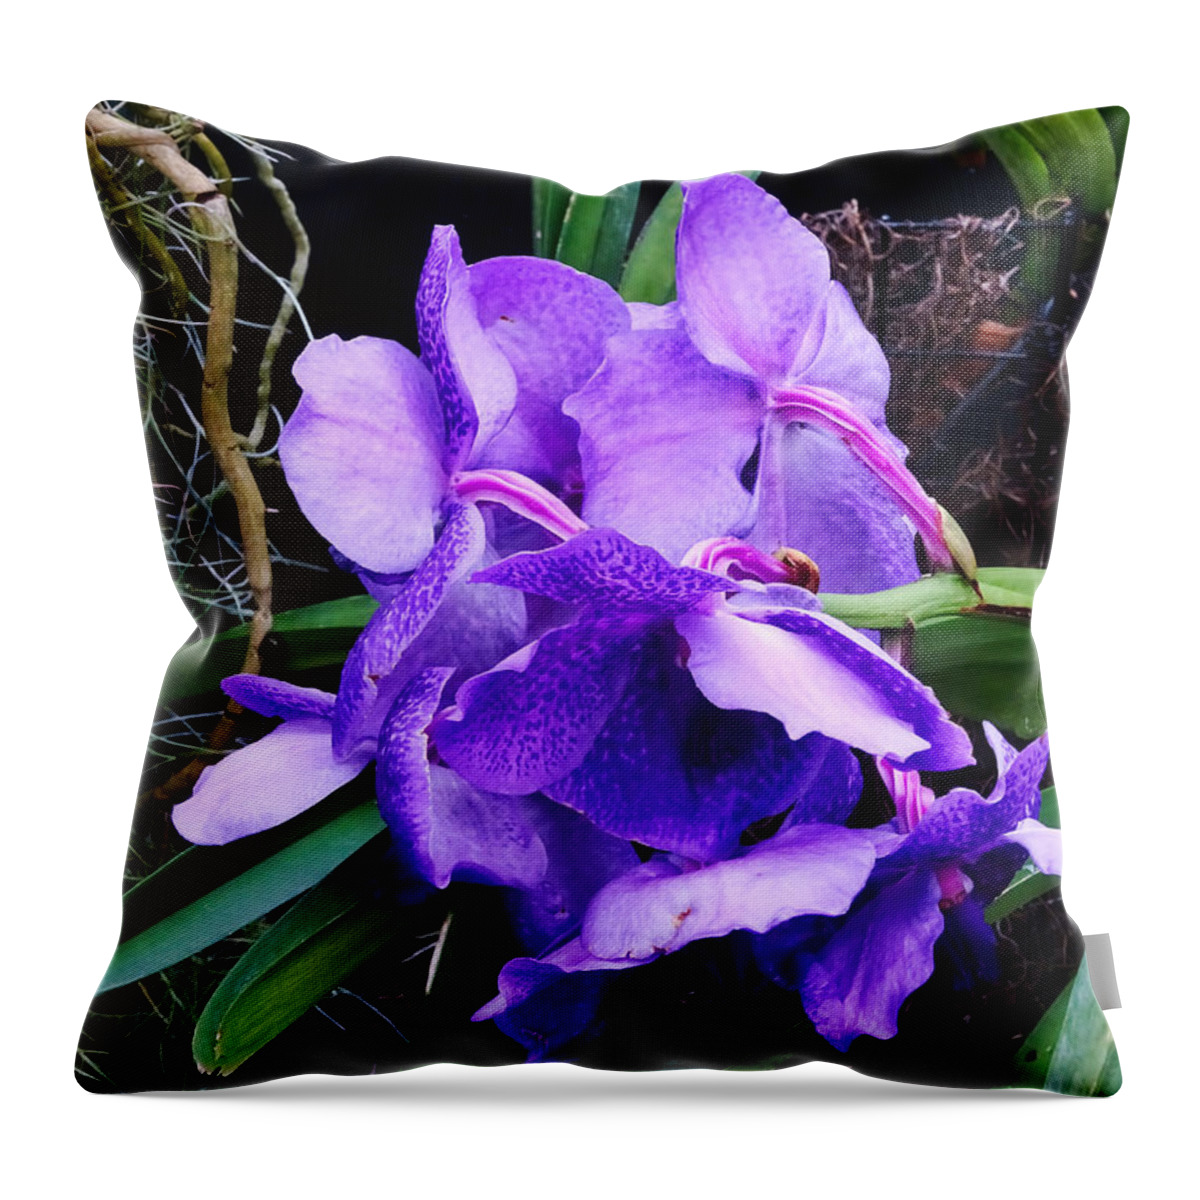 Flower Throw Pillow featuring the photograph Violet Elephant Hiding by Russ Considine